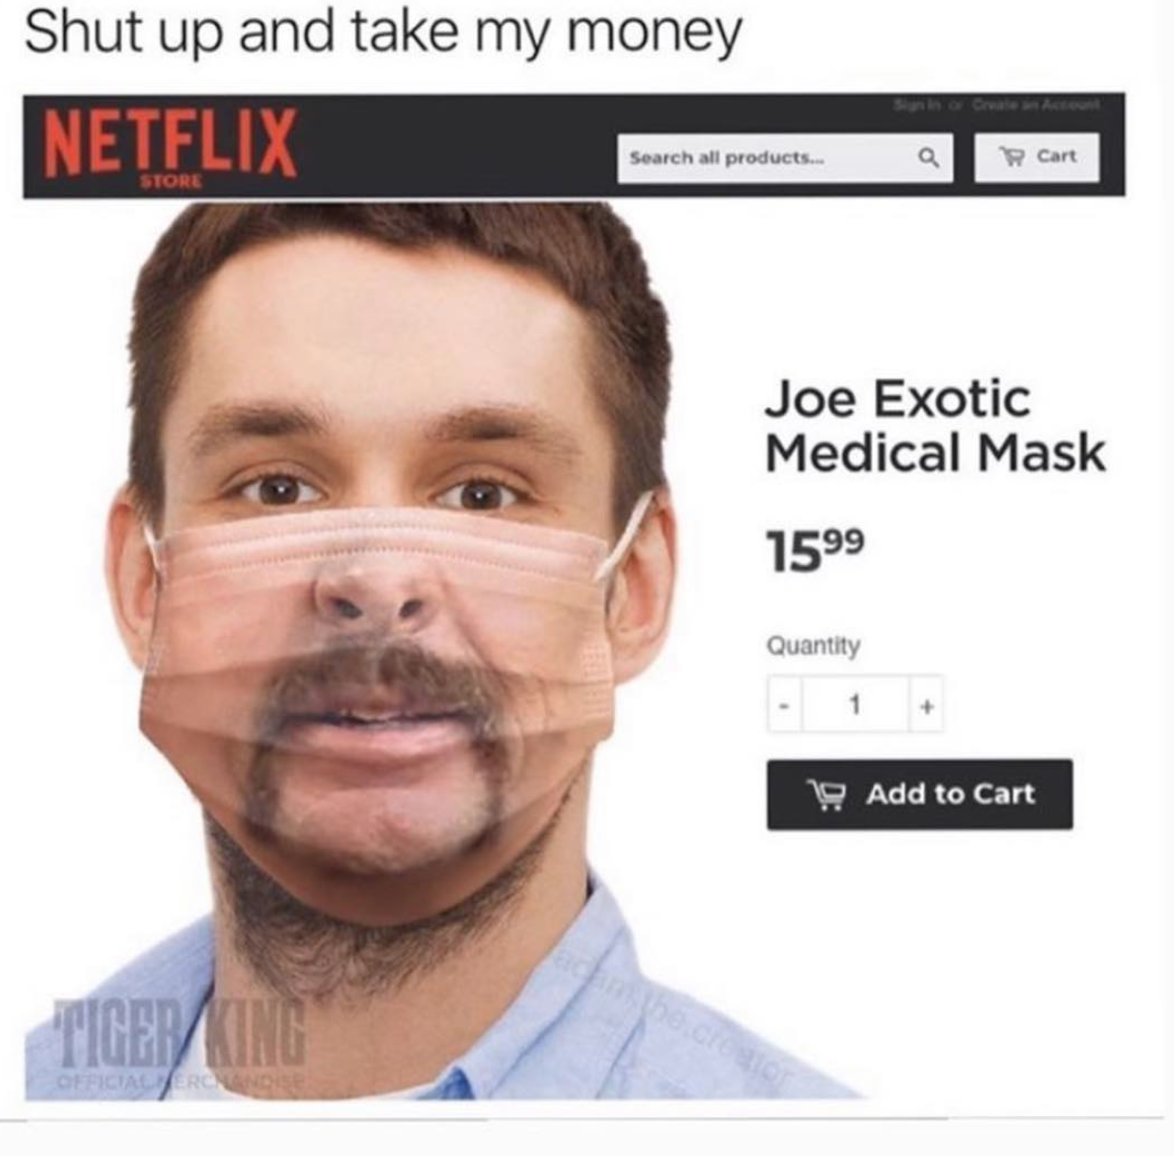 tiger king - jaw - Shut up and take my money Netflix Search product Cart Joe Exotic Medical Mask 1599 Quantity Add to cart